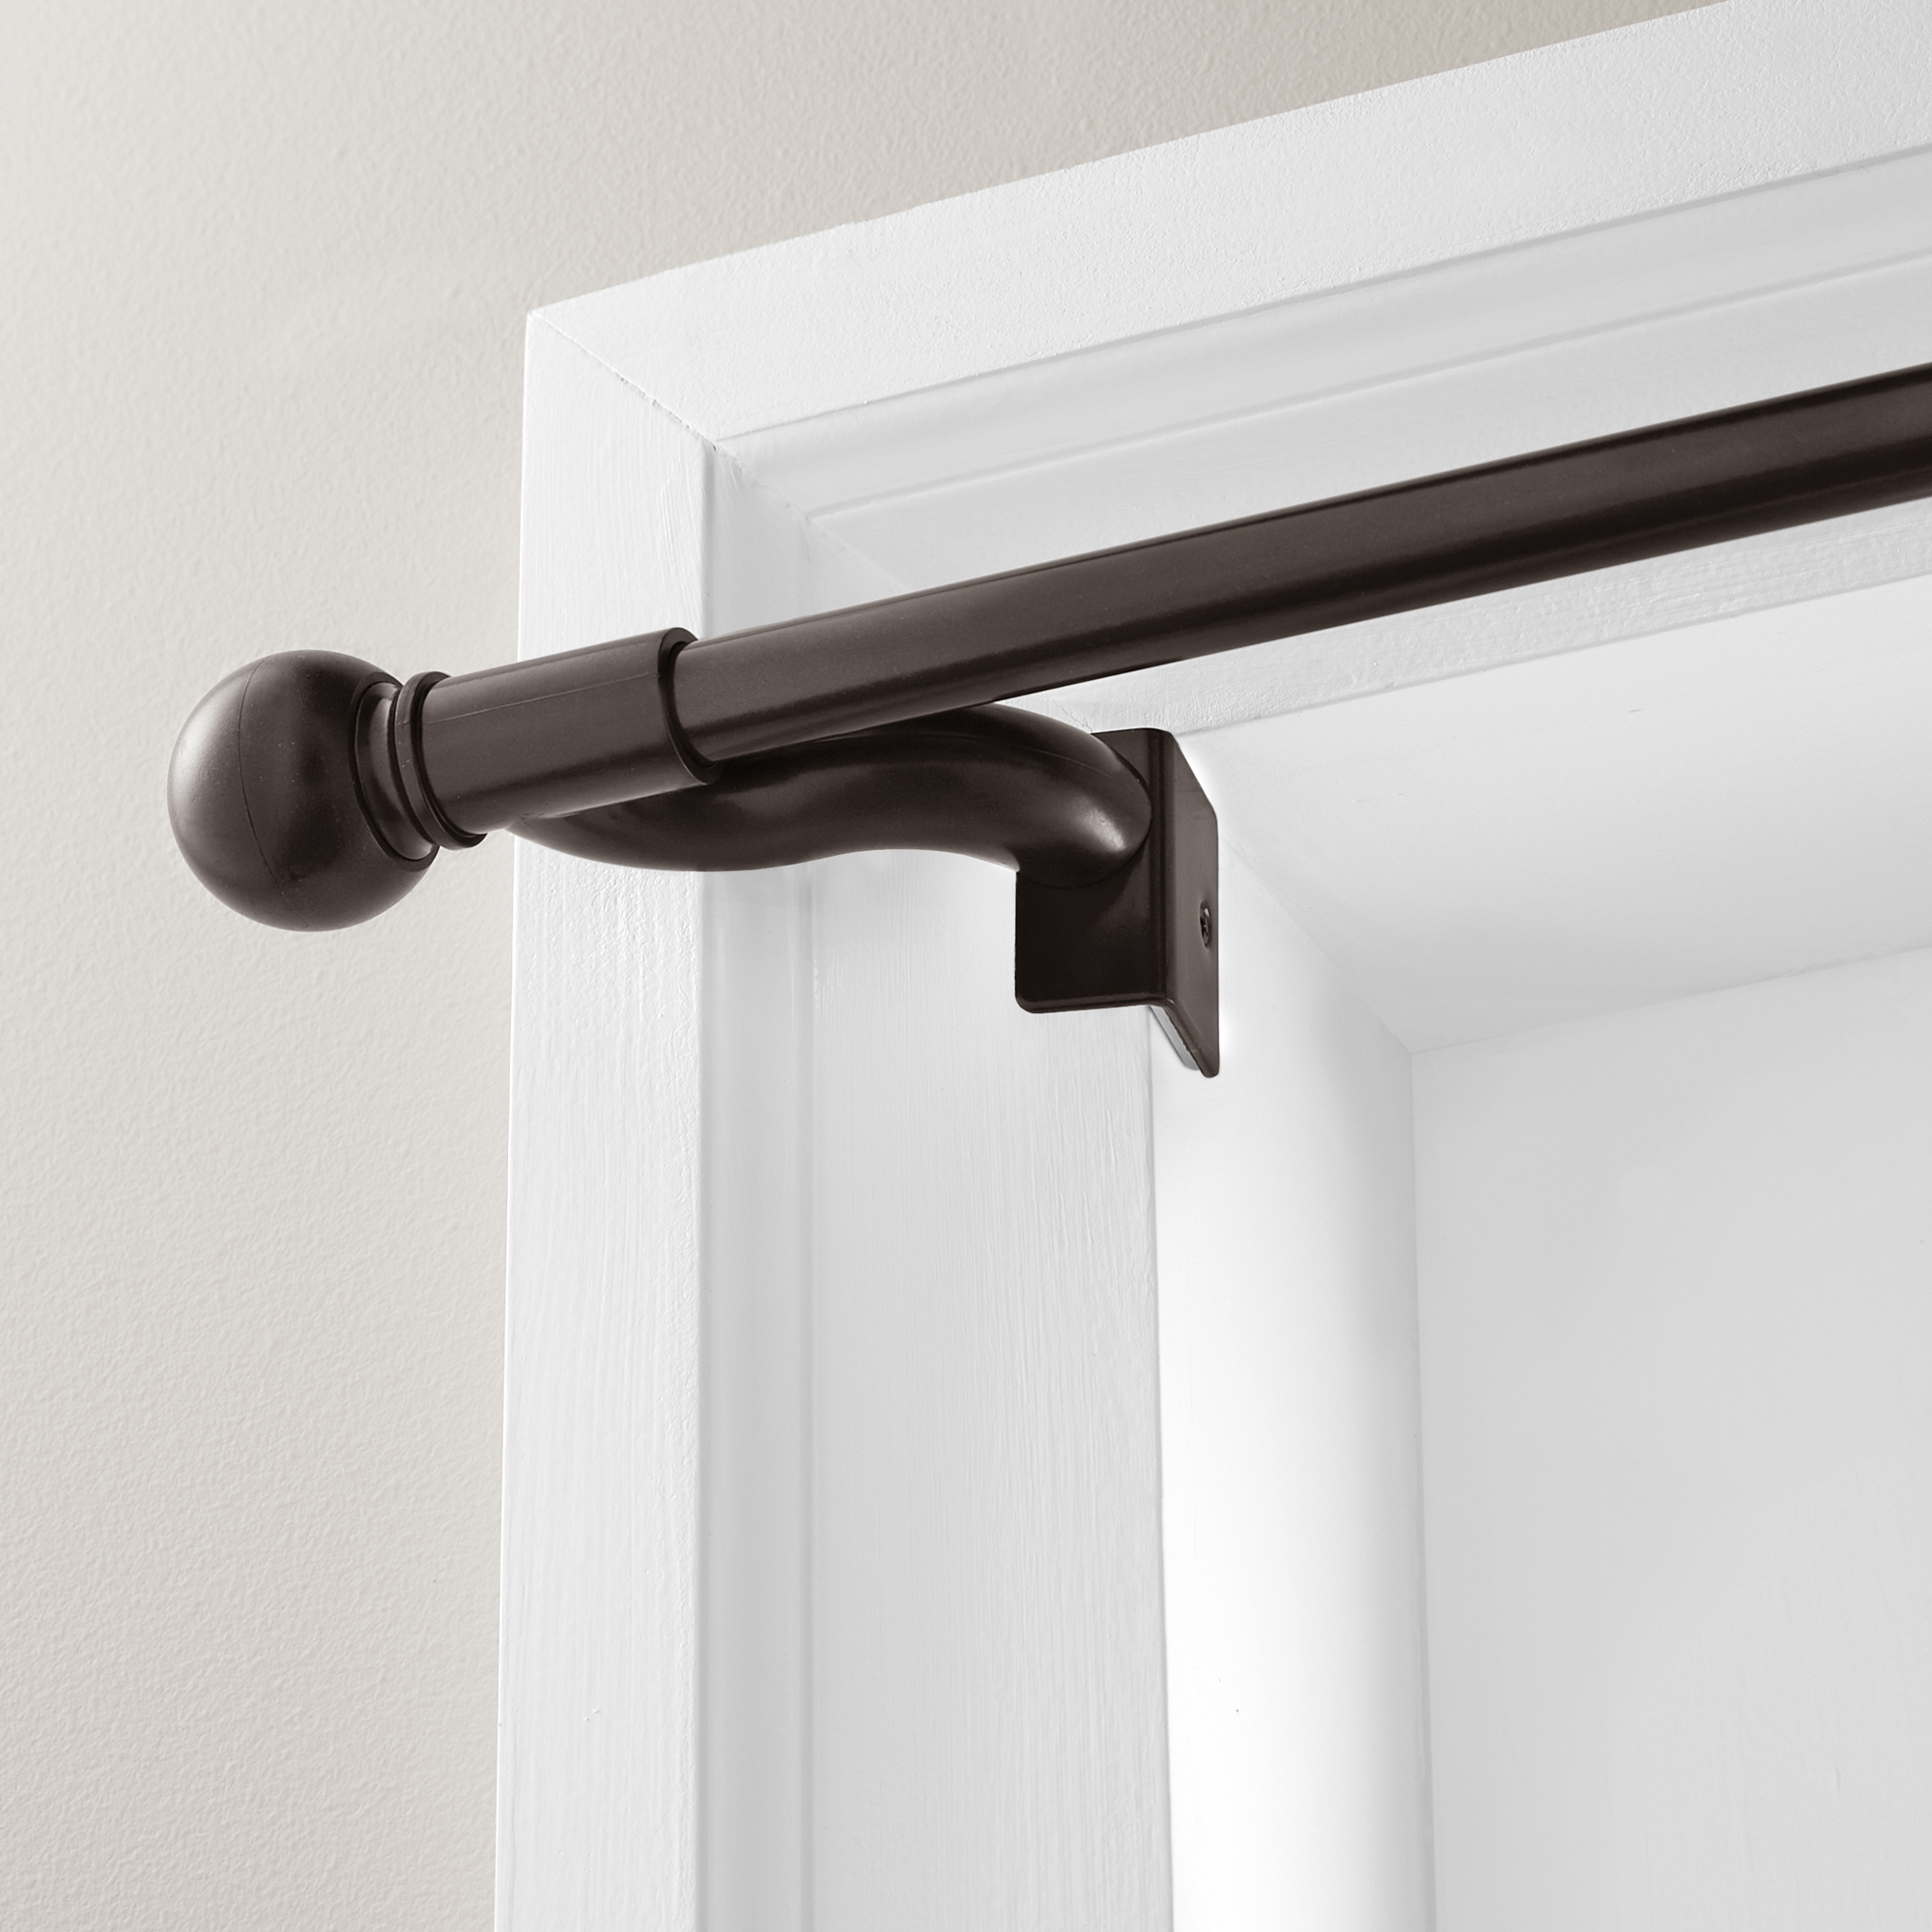 Smart Rods Twist & Shout Tension, Single Curtain Rod, 28"-48", Oil Rubbed Bronze - image 1 of 11